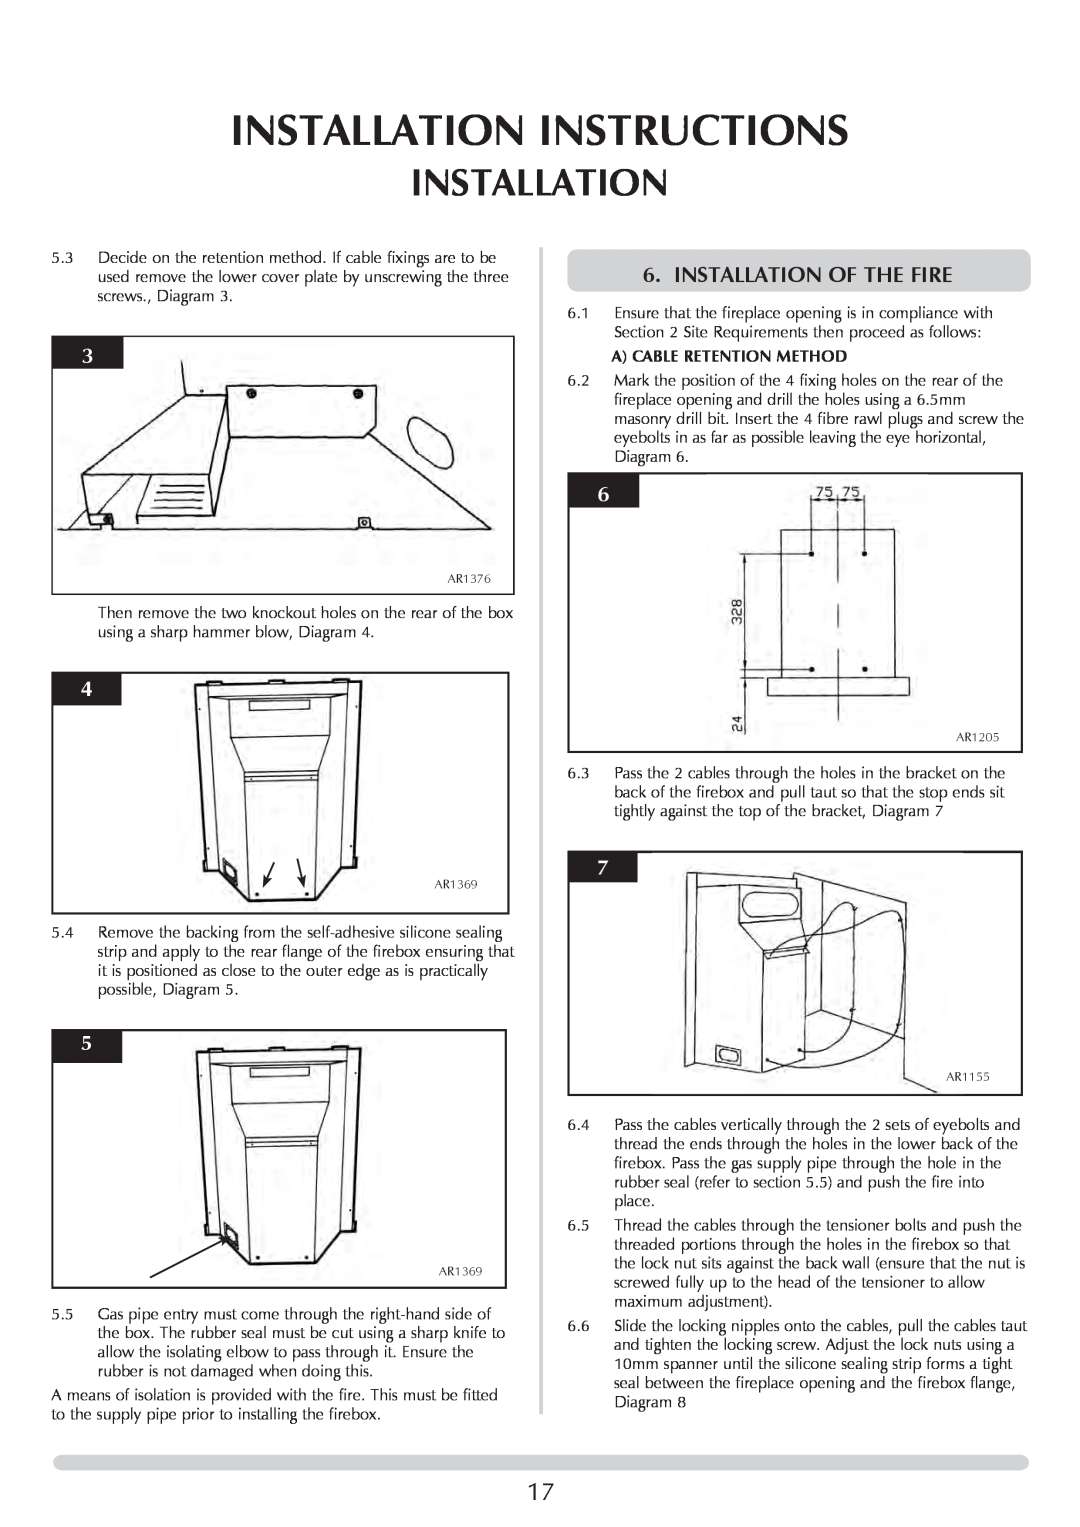 Stovax PR0741 manual Installation Instructions, Installation Of The Fire, Acable Retention Method 